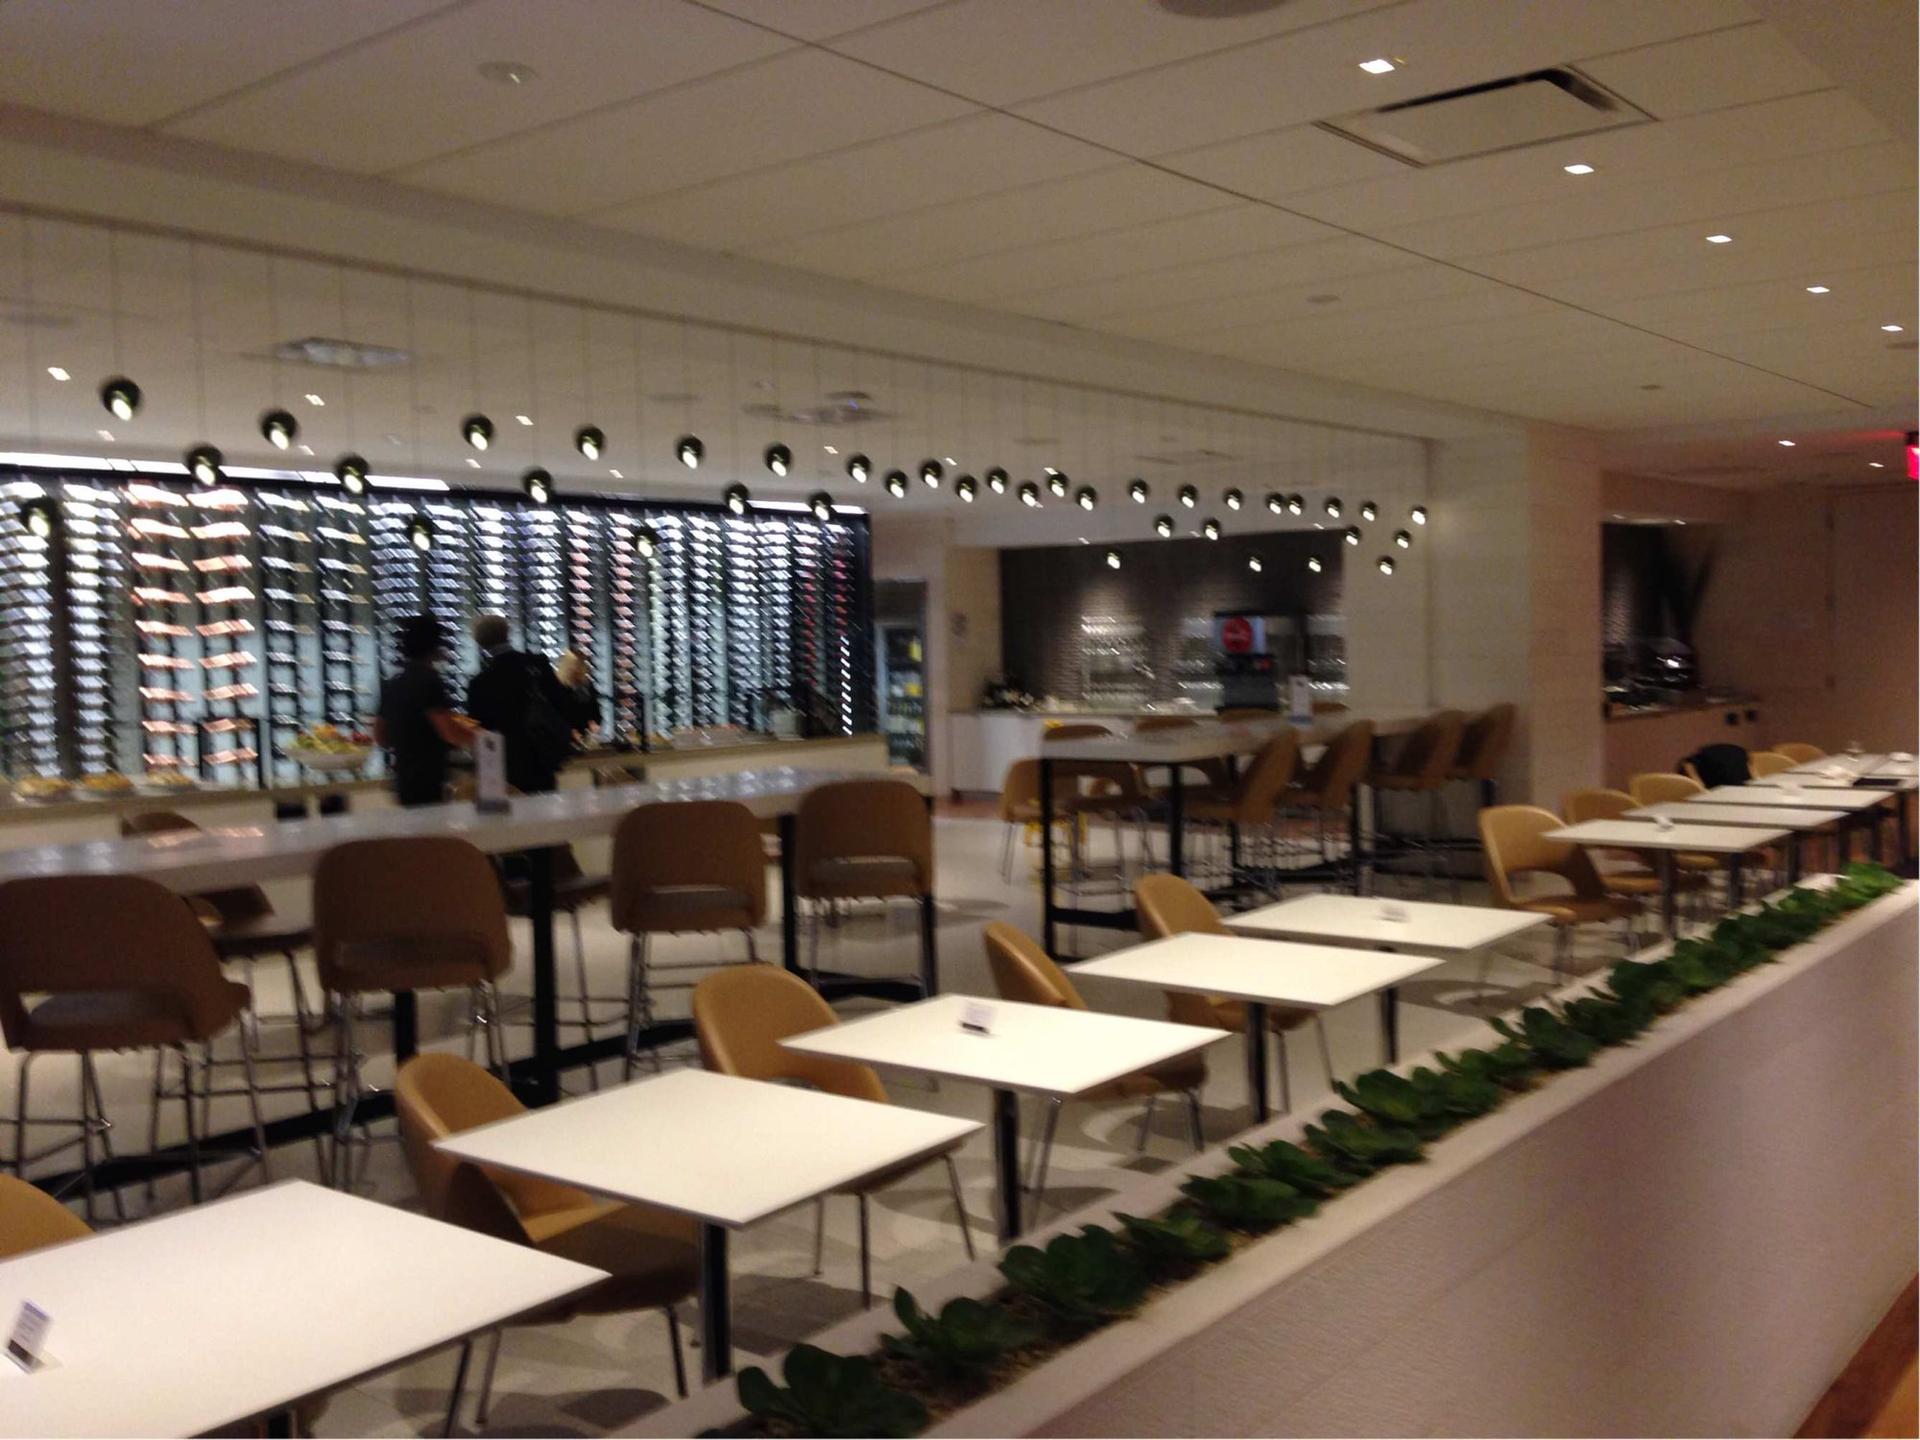 Star Alliance Business Class Lounge image 33 of 72